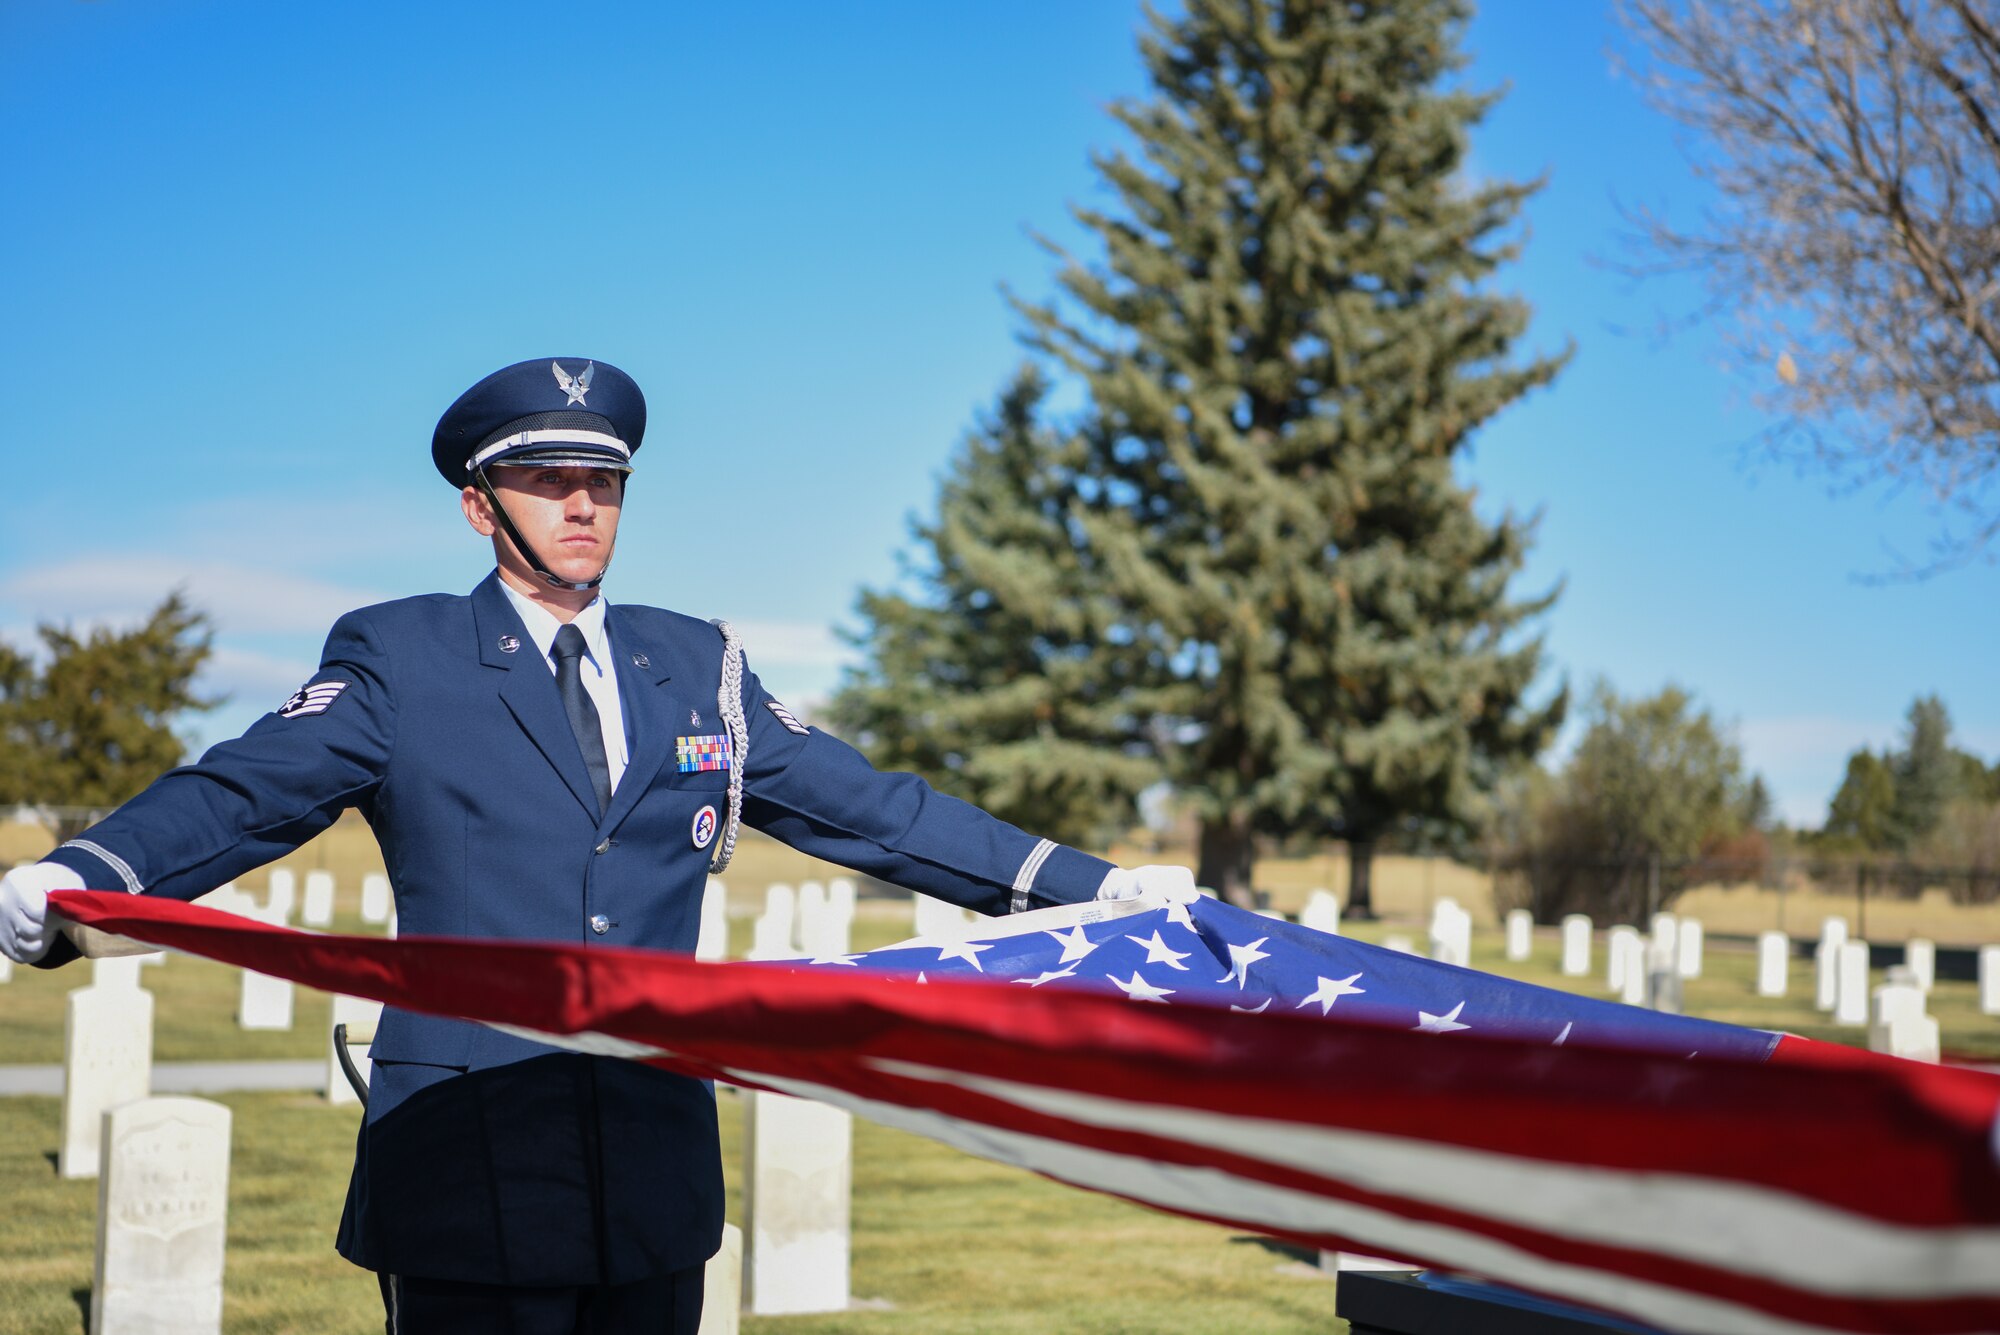 Base Honor Guard fold an American flag for retired Master Sgt. Robert Meadows on Oct. 22, 2019, on F.E. Warren Air Force Base, Wyo. While serving, Meadows provided high precision geospatial and geophysical information for defense and intelligence needs around the world. (U.S. Air Force photo by Senior Airman Nicole Reed)